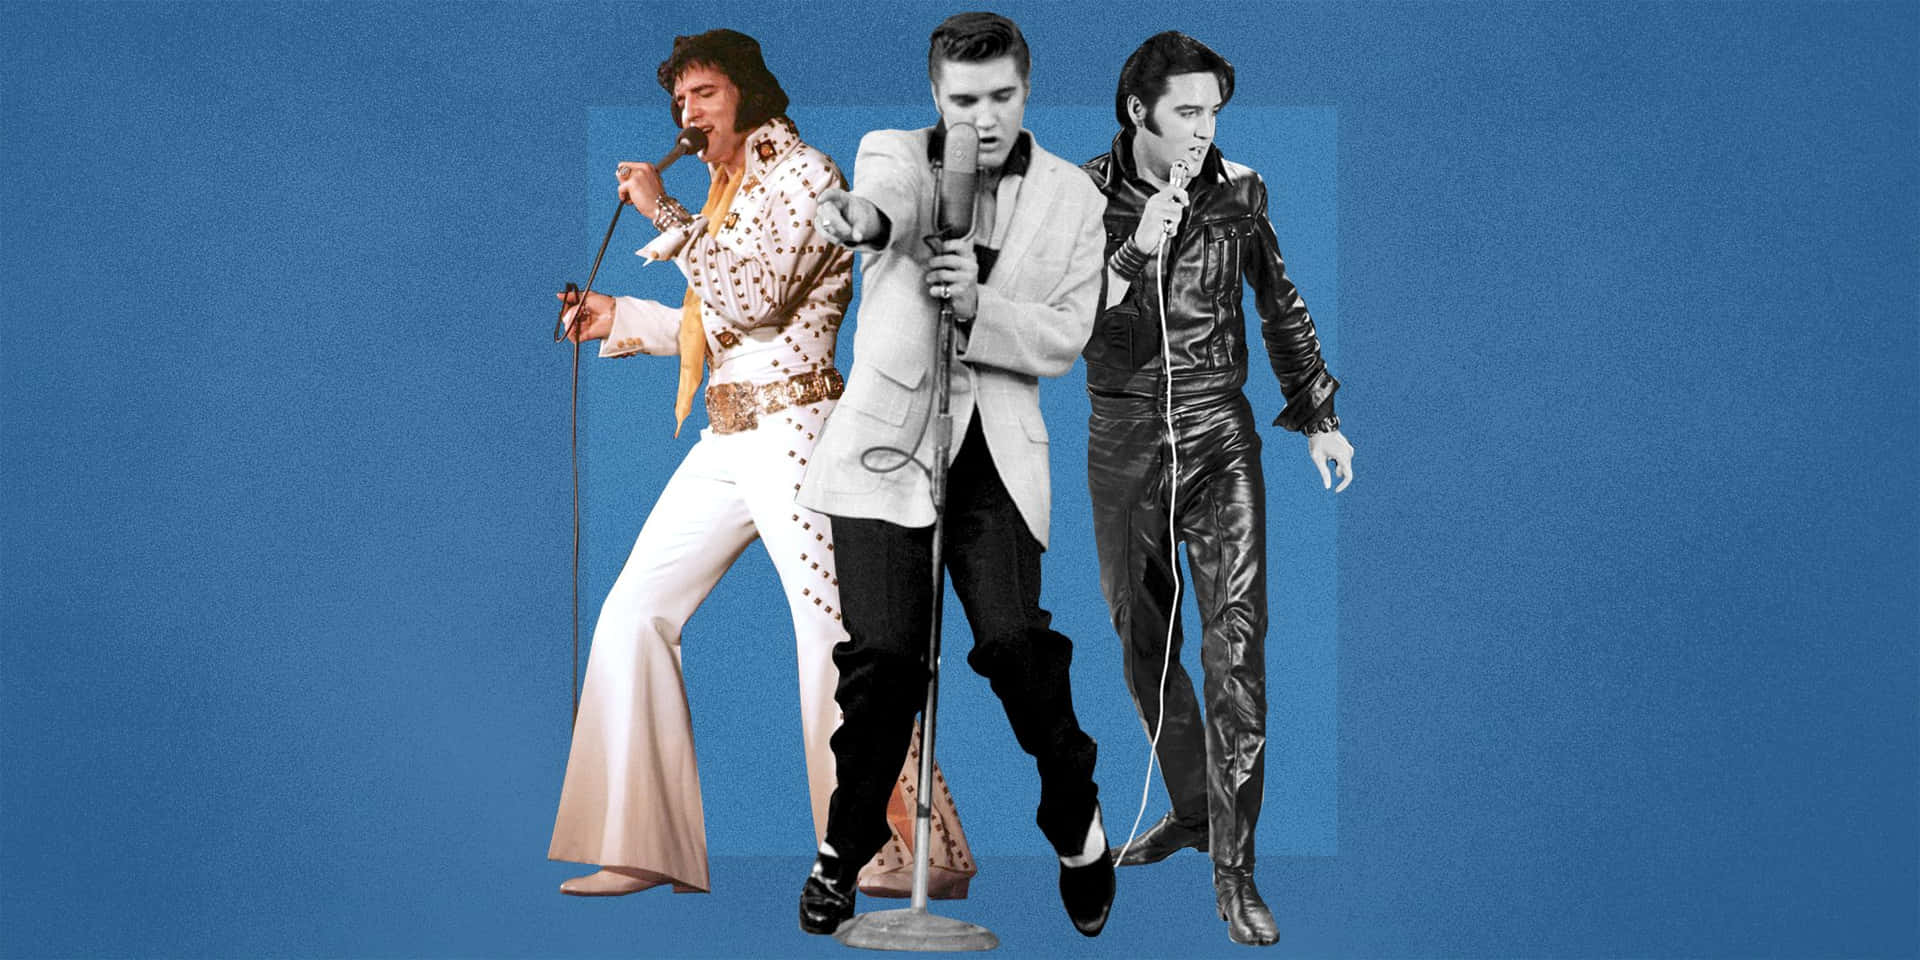 4k Elvis In Different Outfits Wallpaper